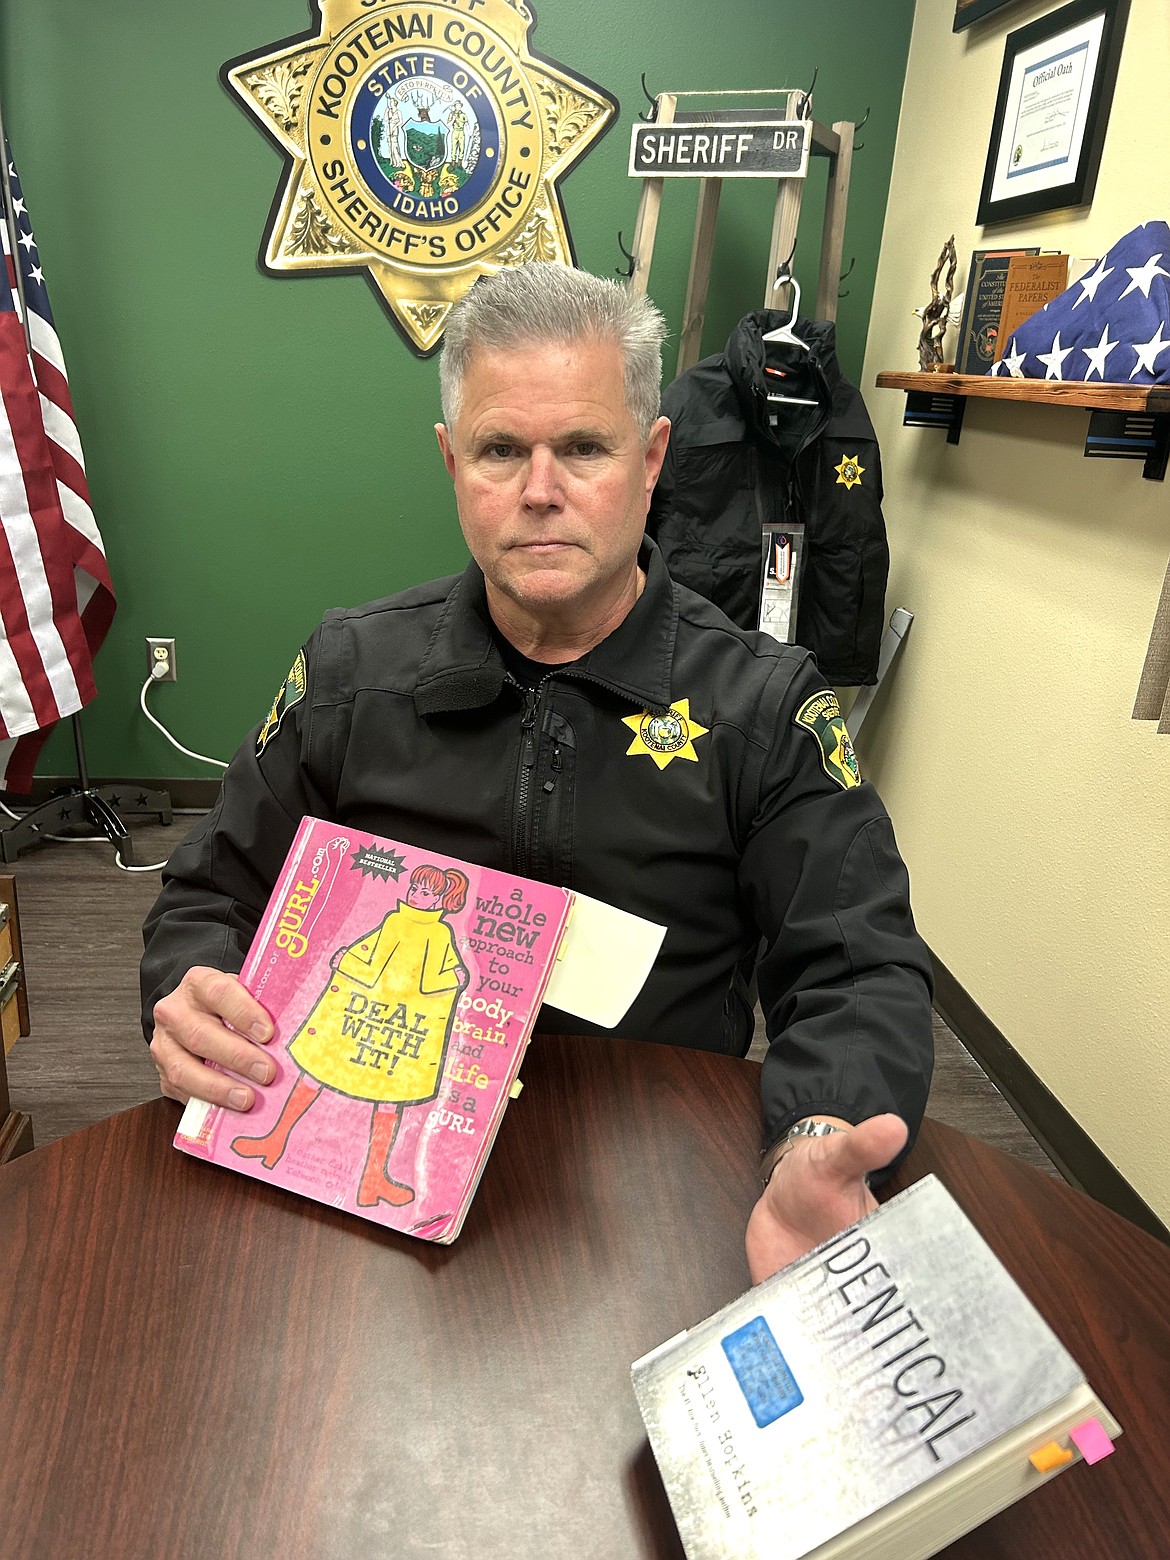 Kootenai County Sheriff Bob Norris displays two books from the Post Falls Public Library that he said have sexually explicit material.